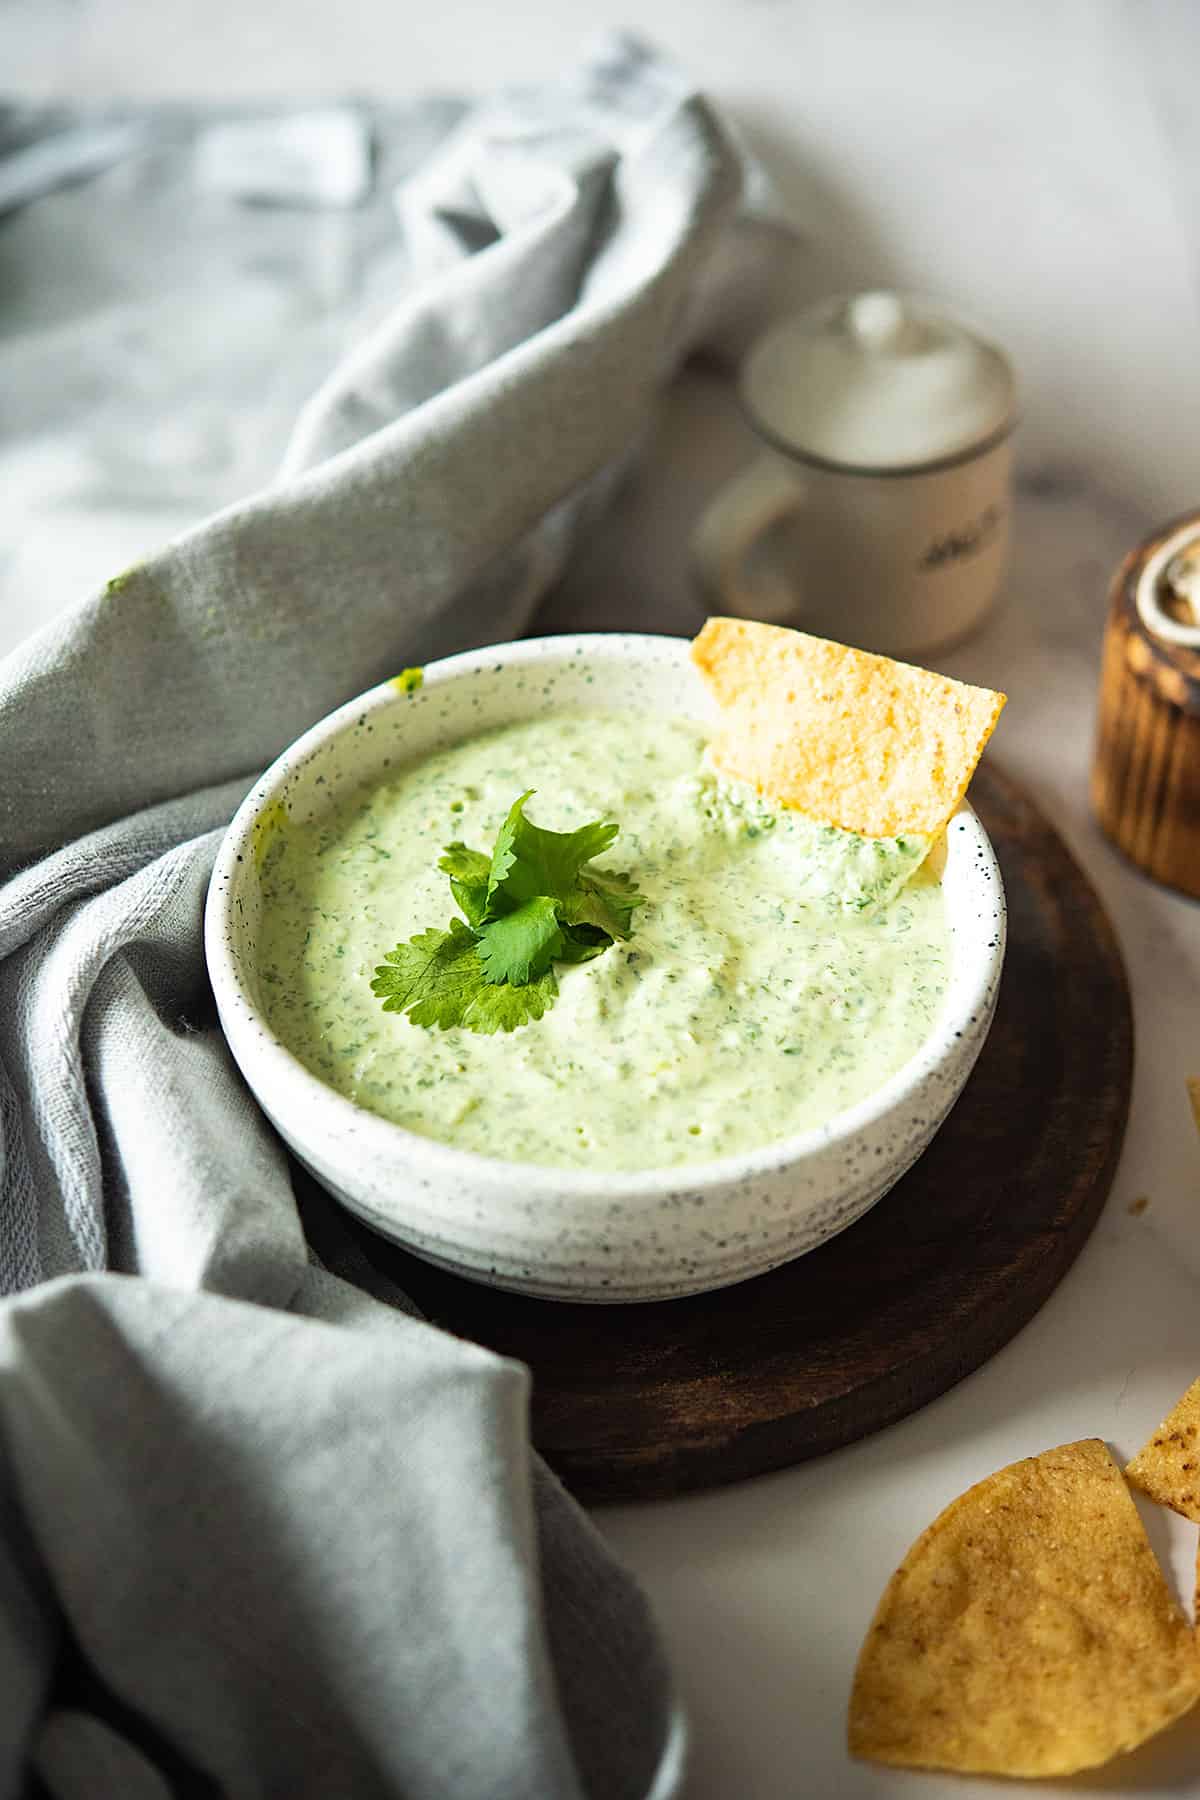 jalapeno cilantro sauce is placed in a bowl